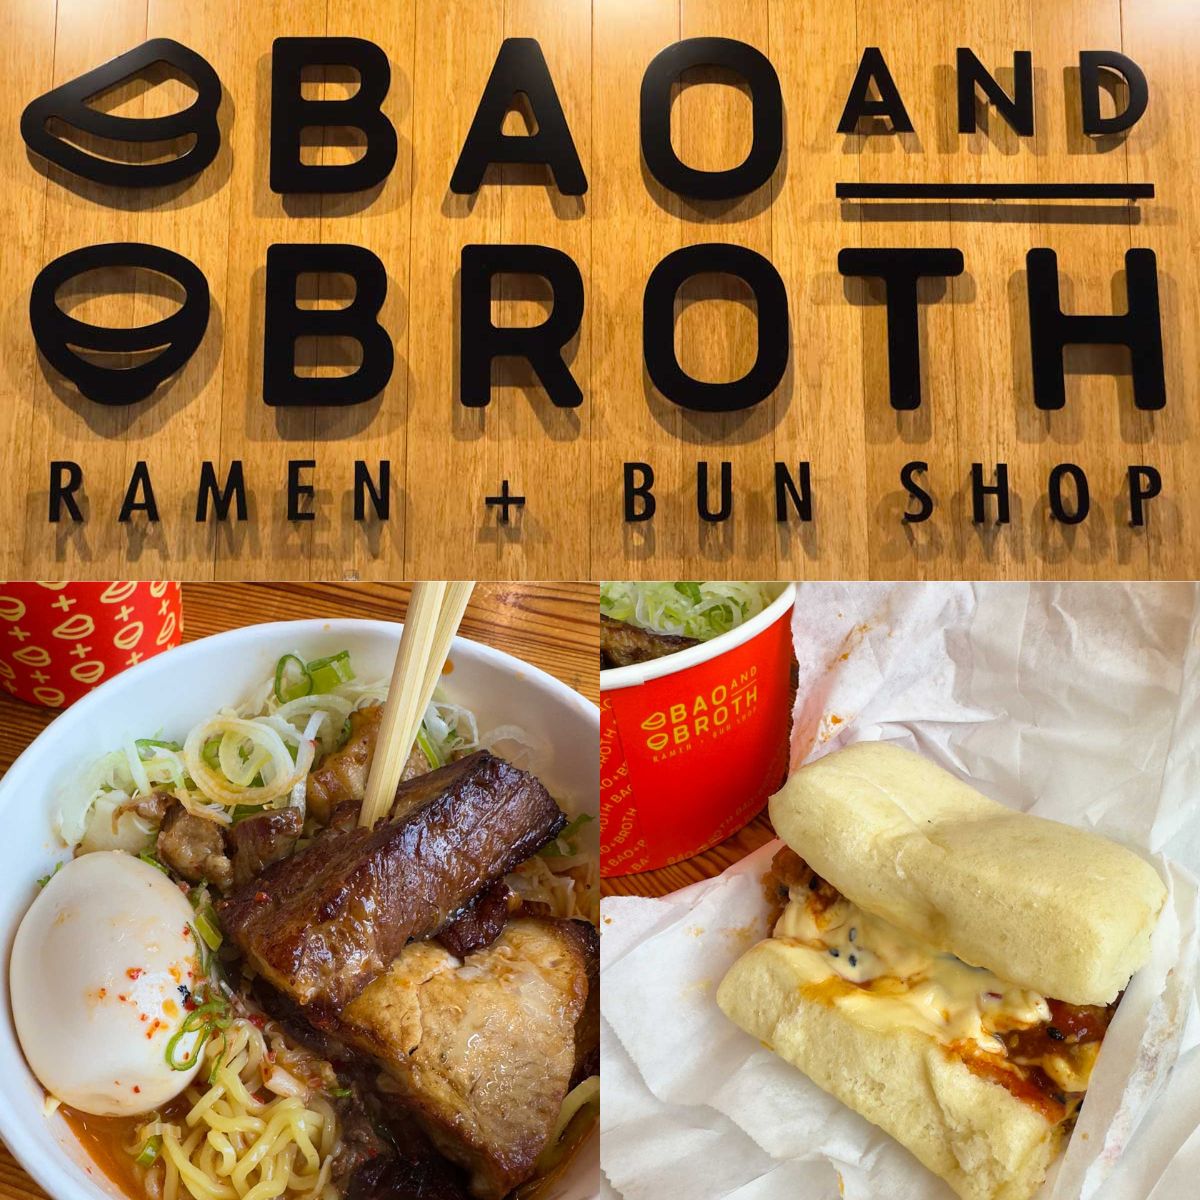 The photo collage shows the sign at the Bao and Broth Ramen shop next to 2 photos of menu items up close.